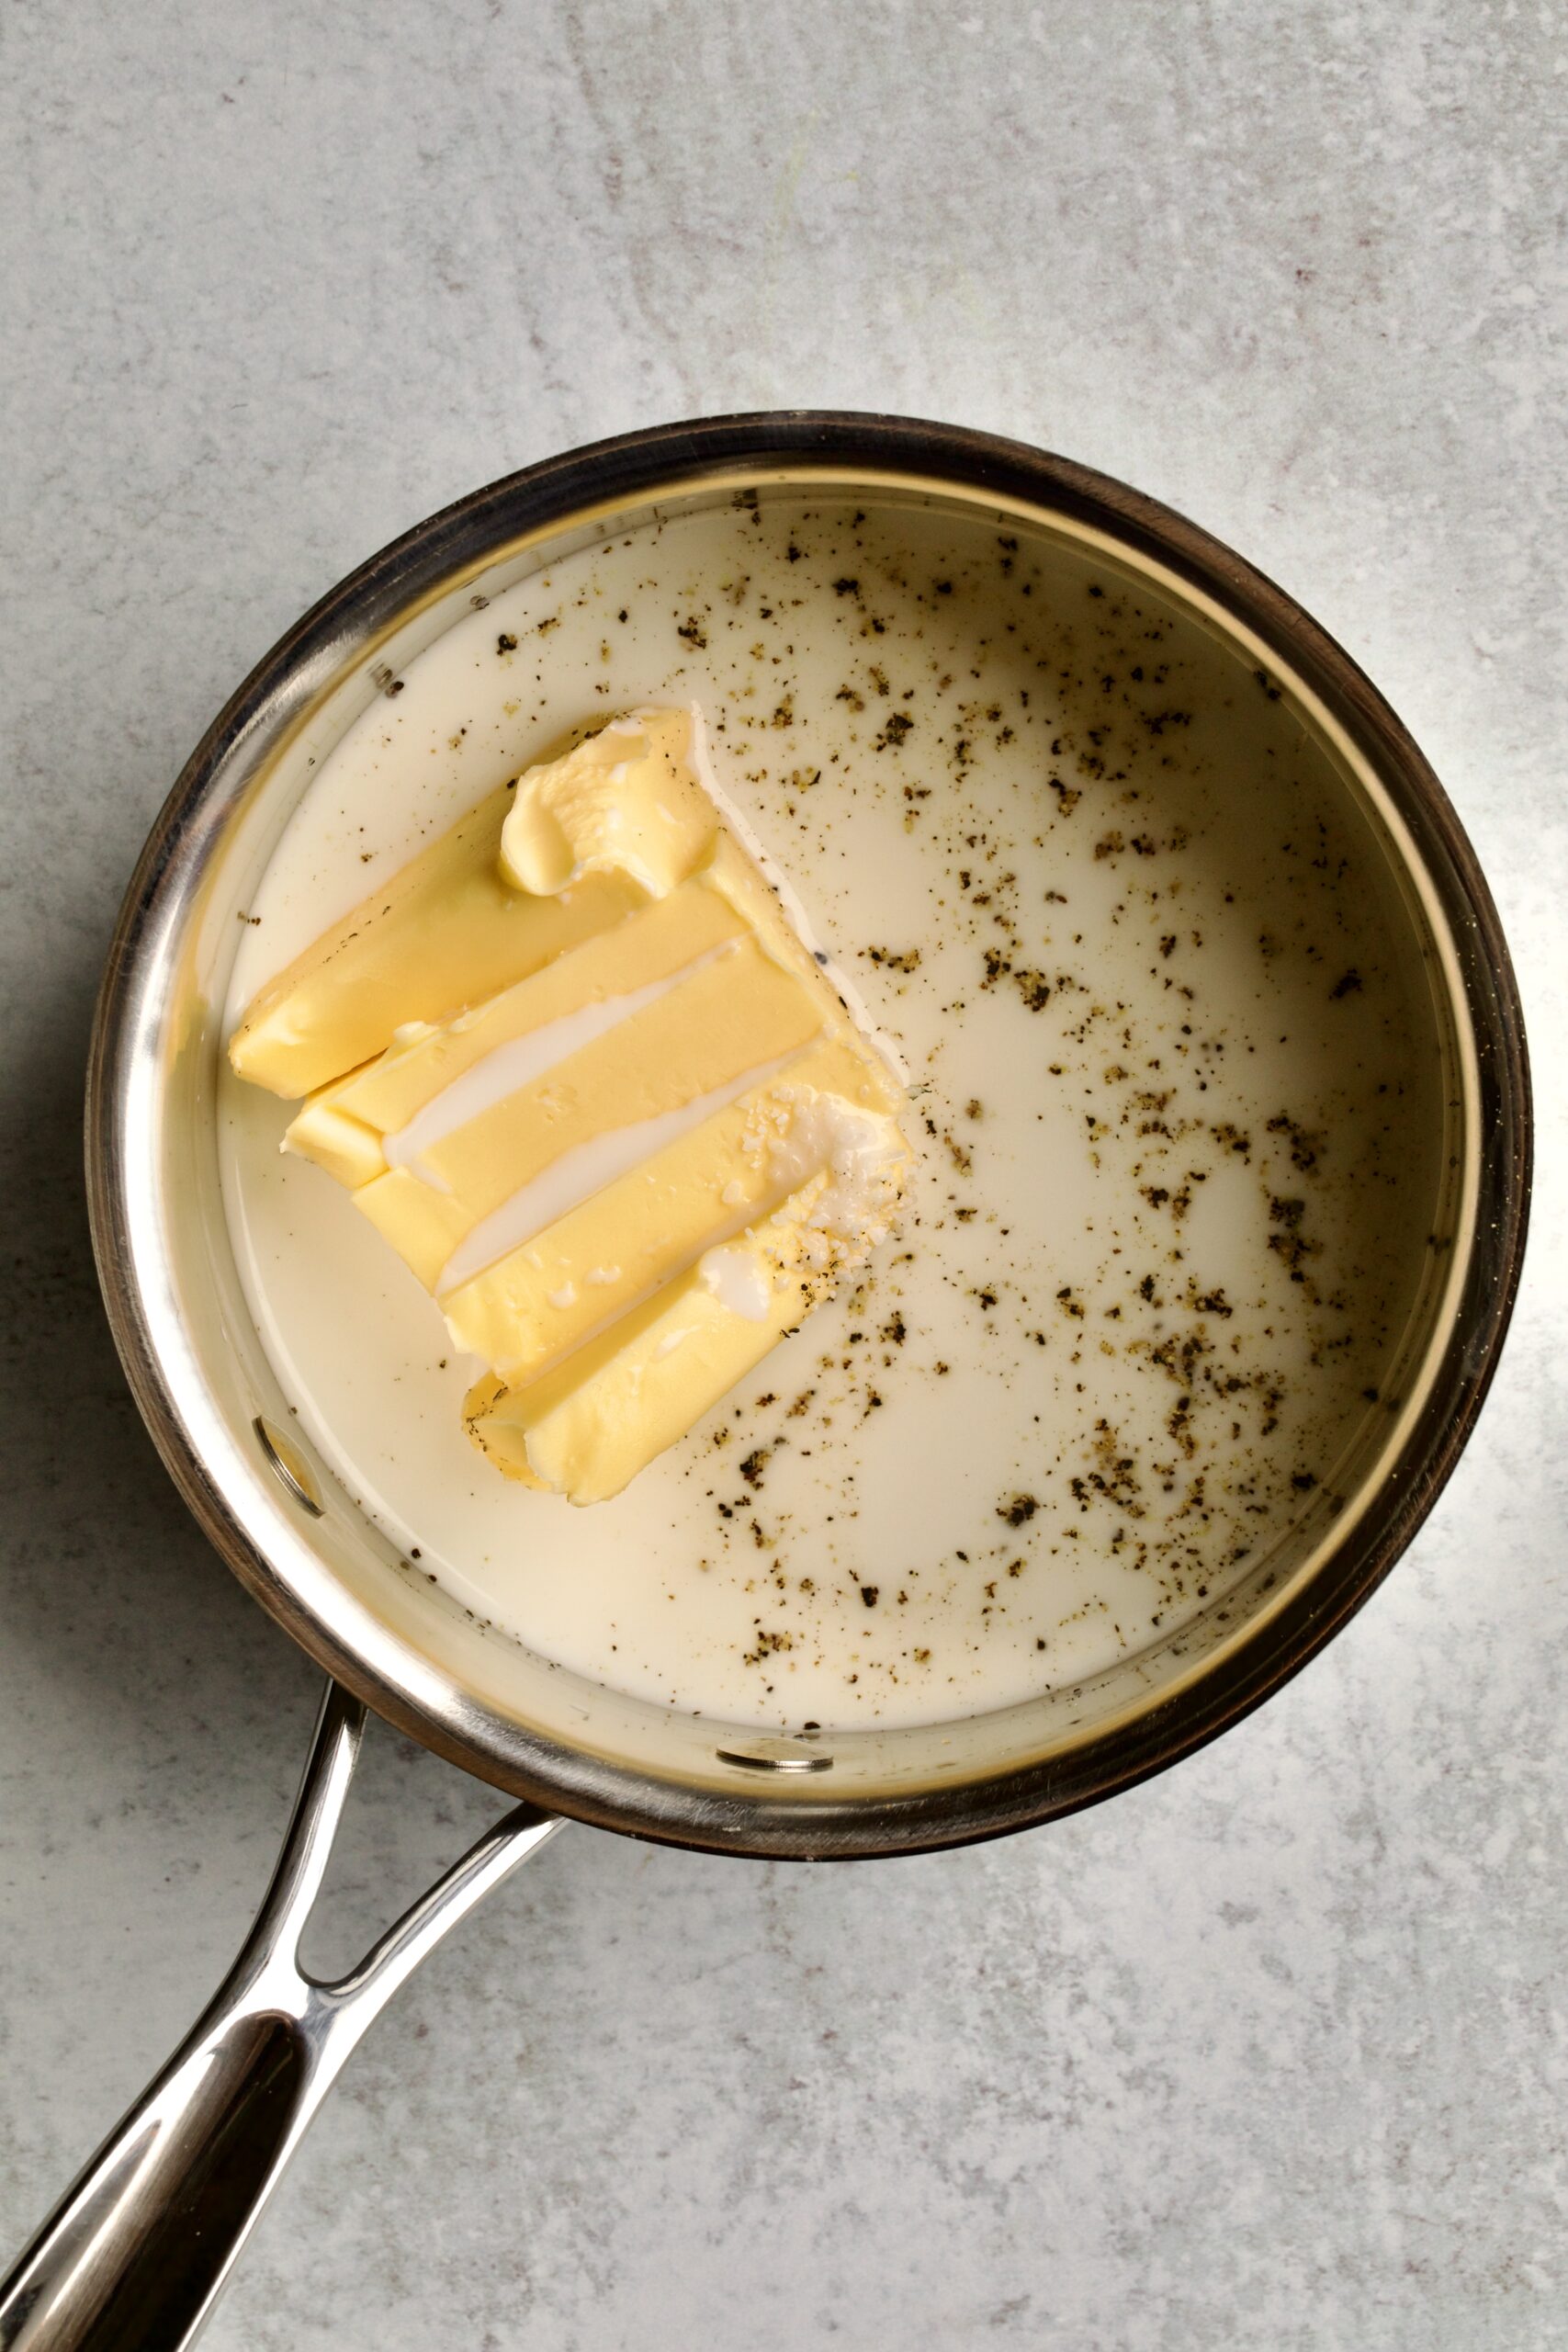 process for making redskin mashed potatoes- melting butter with salt, pepper, and milk